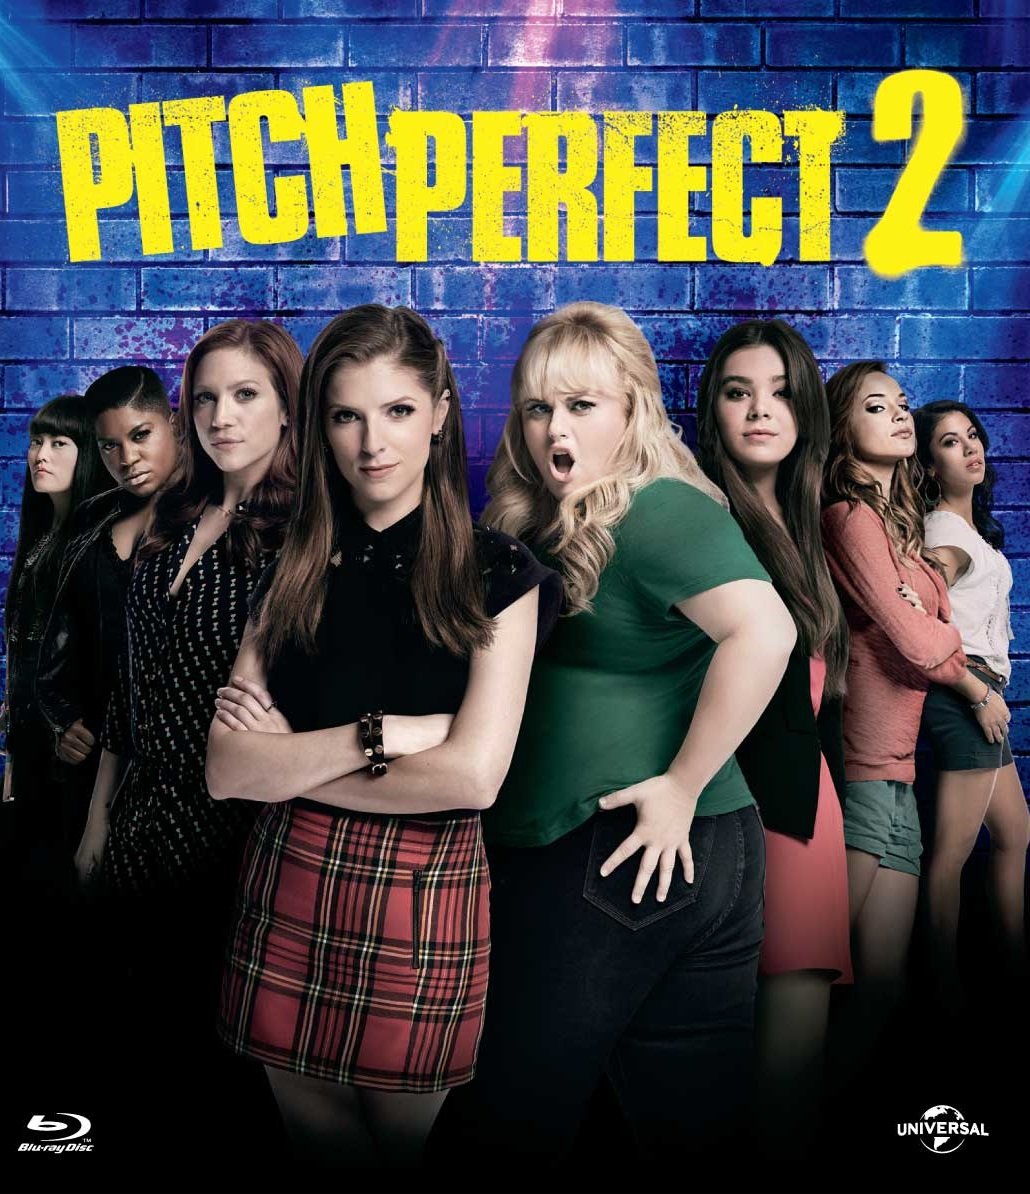 pitch-perfect-2-movie-purchase-or-watch-online